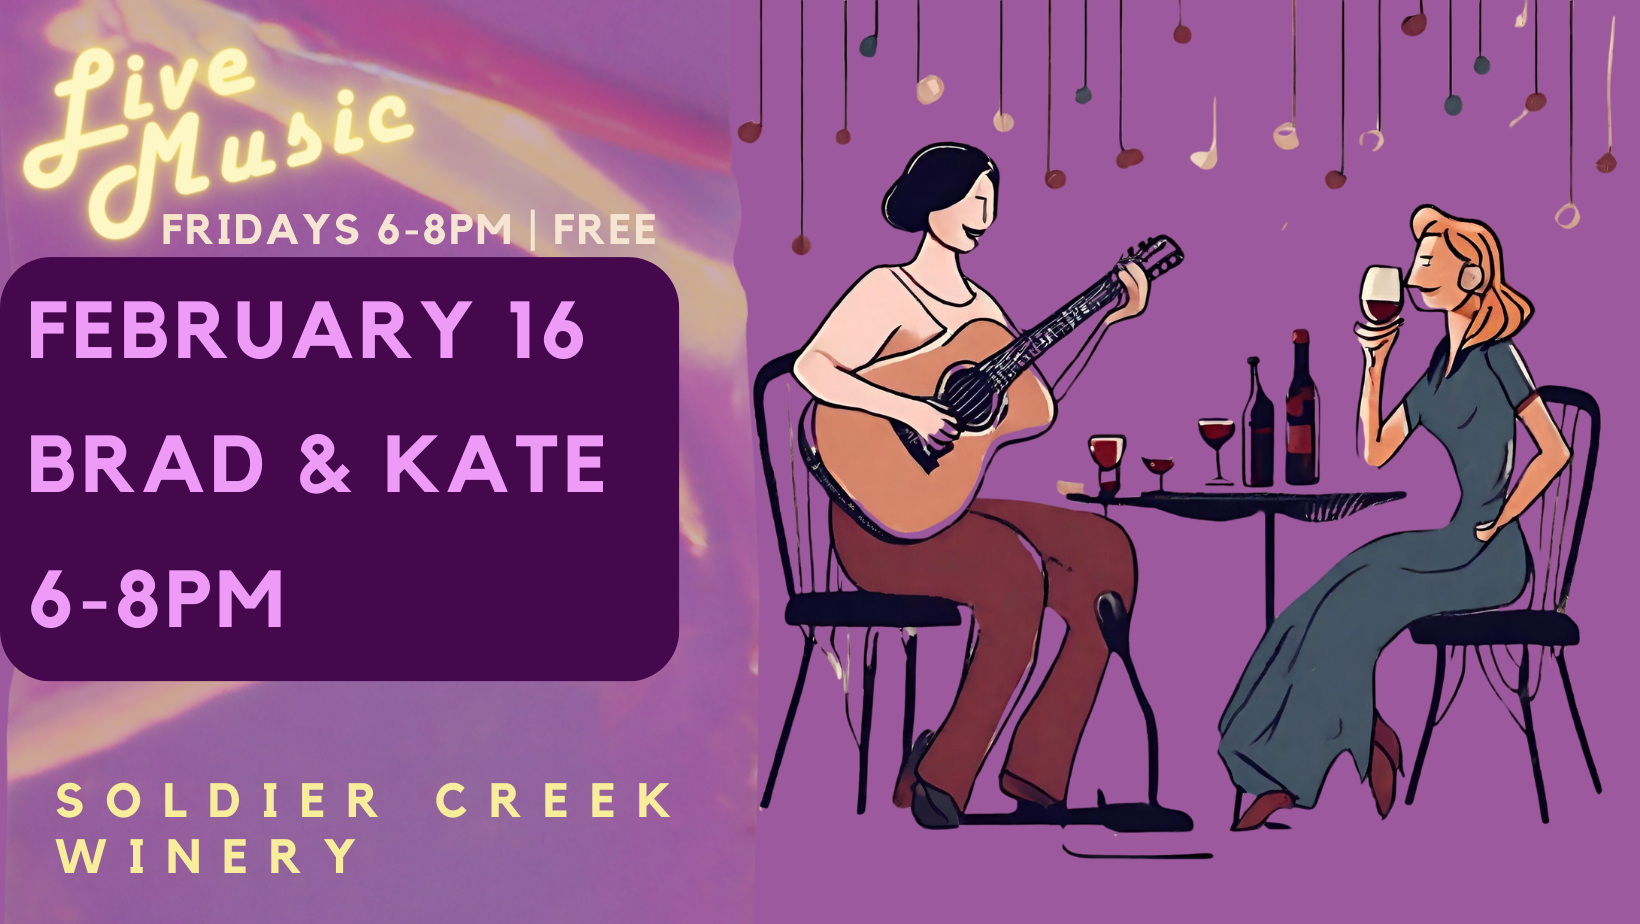 free, live music every friday at soldier creek winery. february 16 is brad & kate from 6-8pm. free to listen.